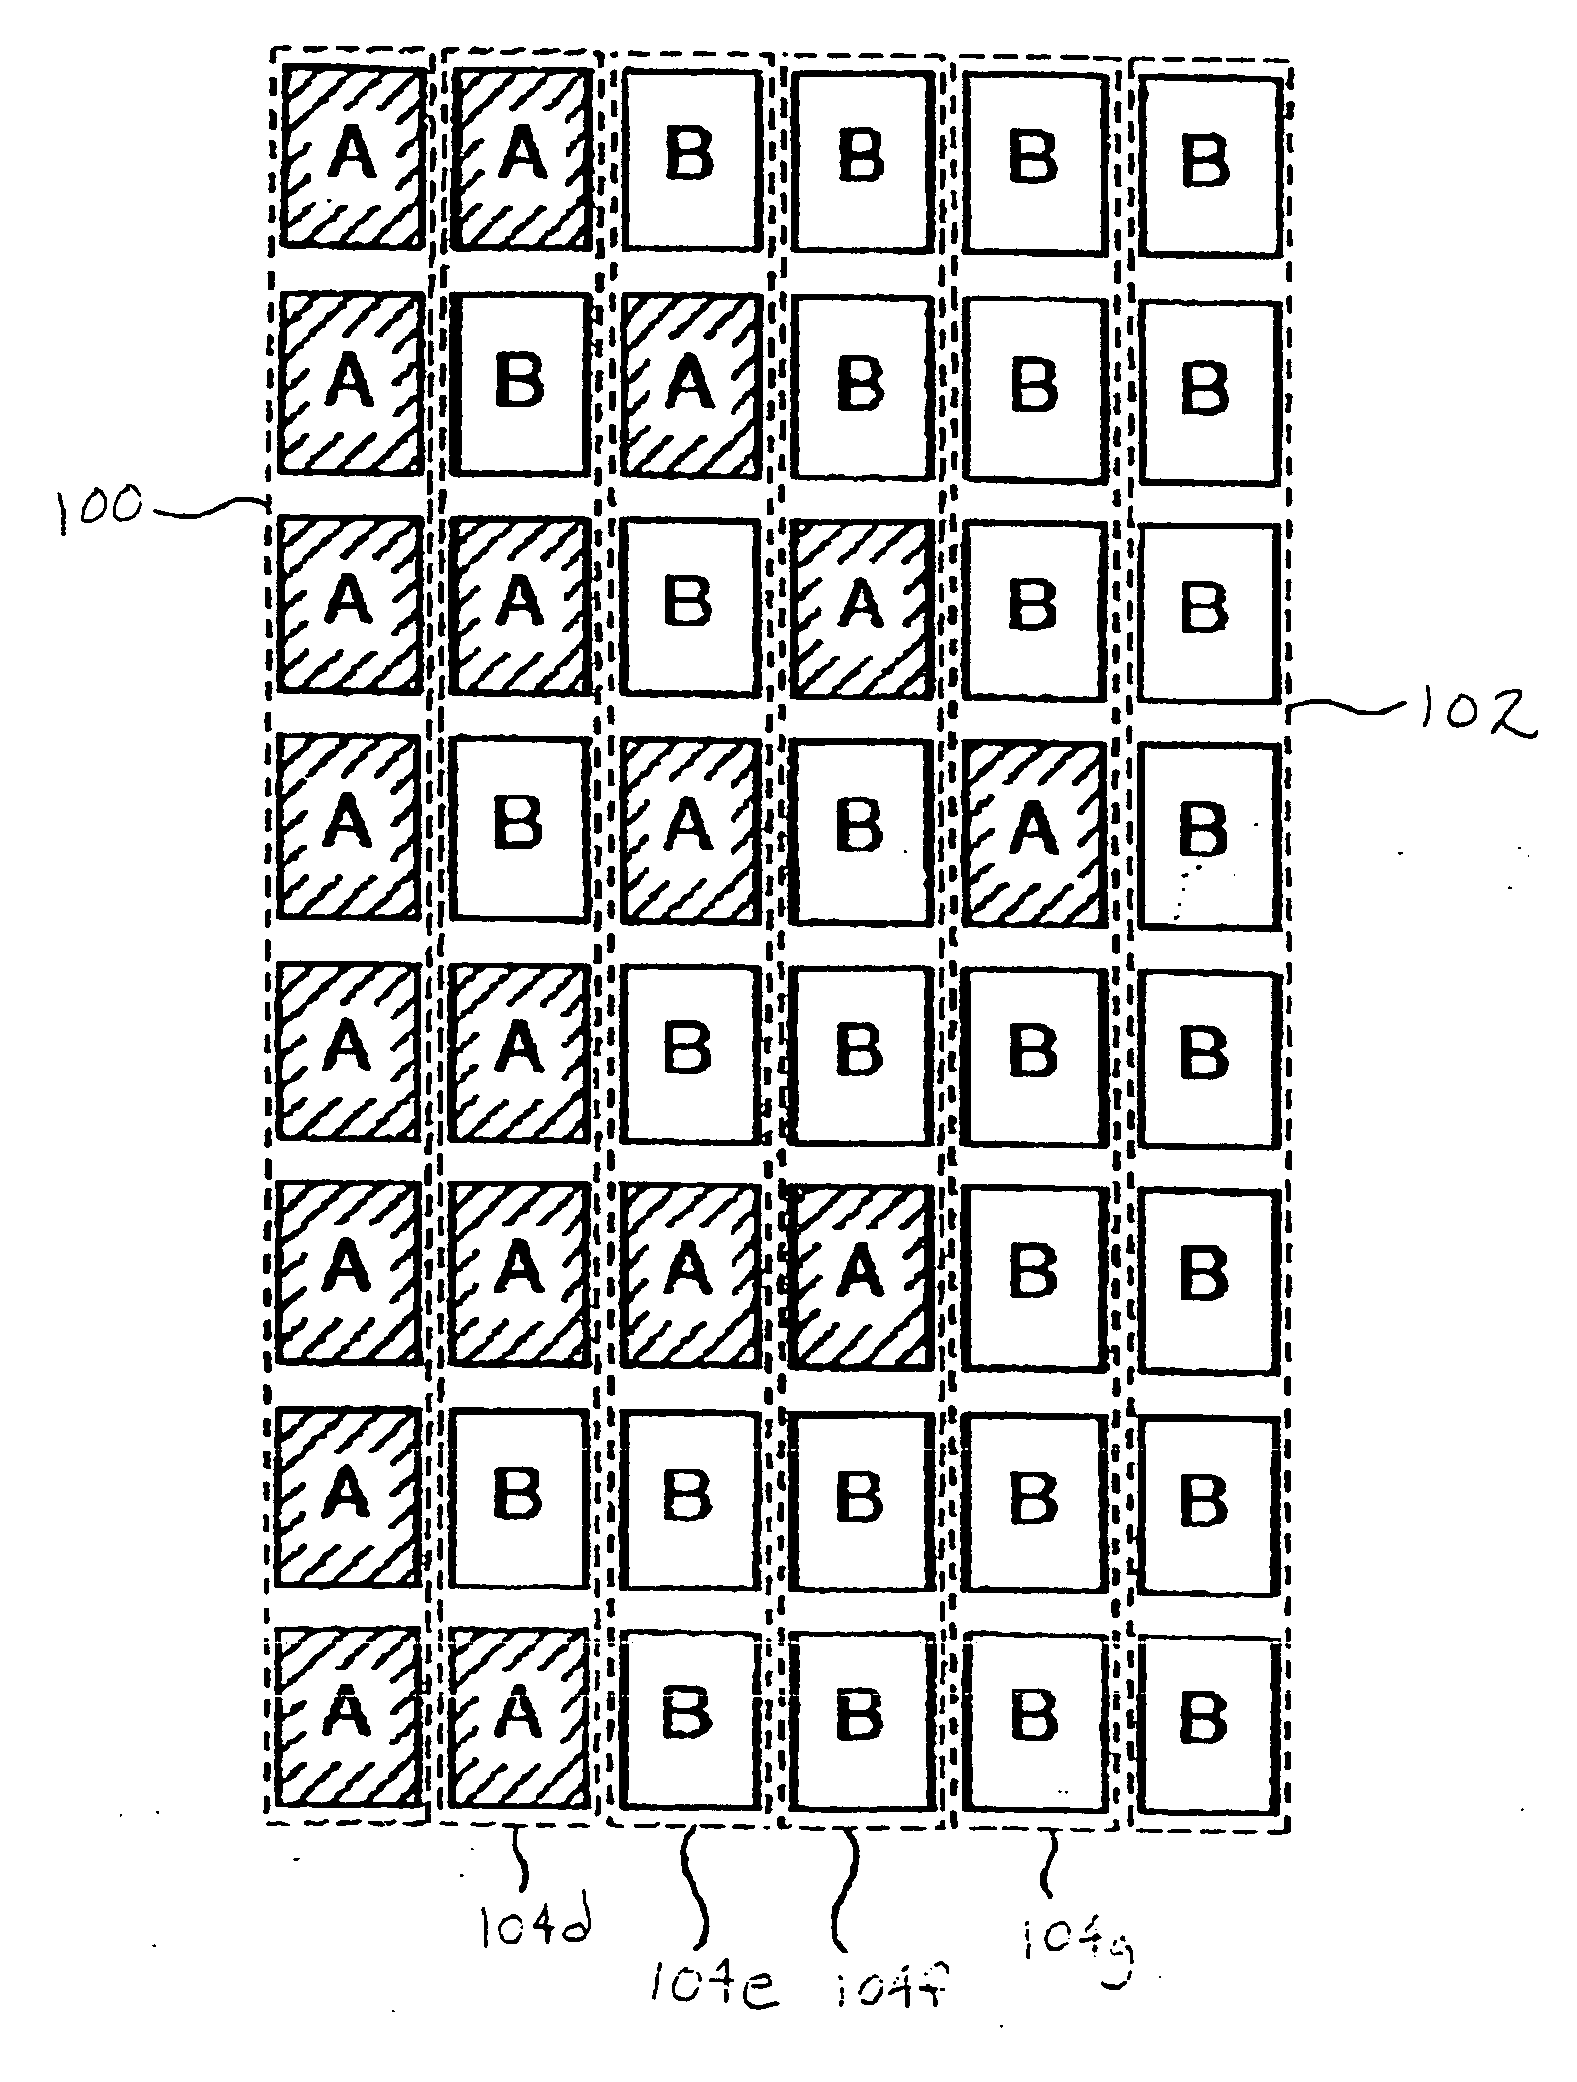 Image display apparatus and method of forming